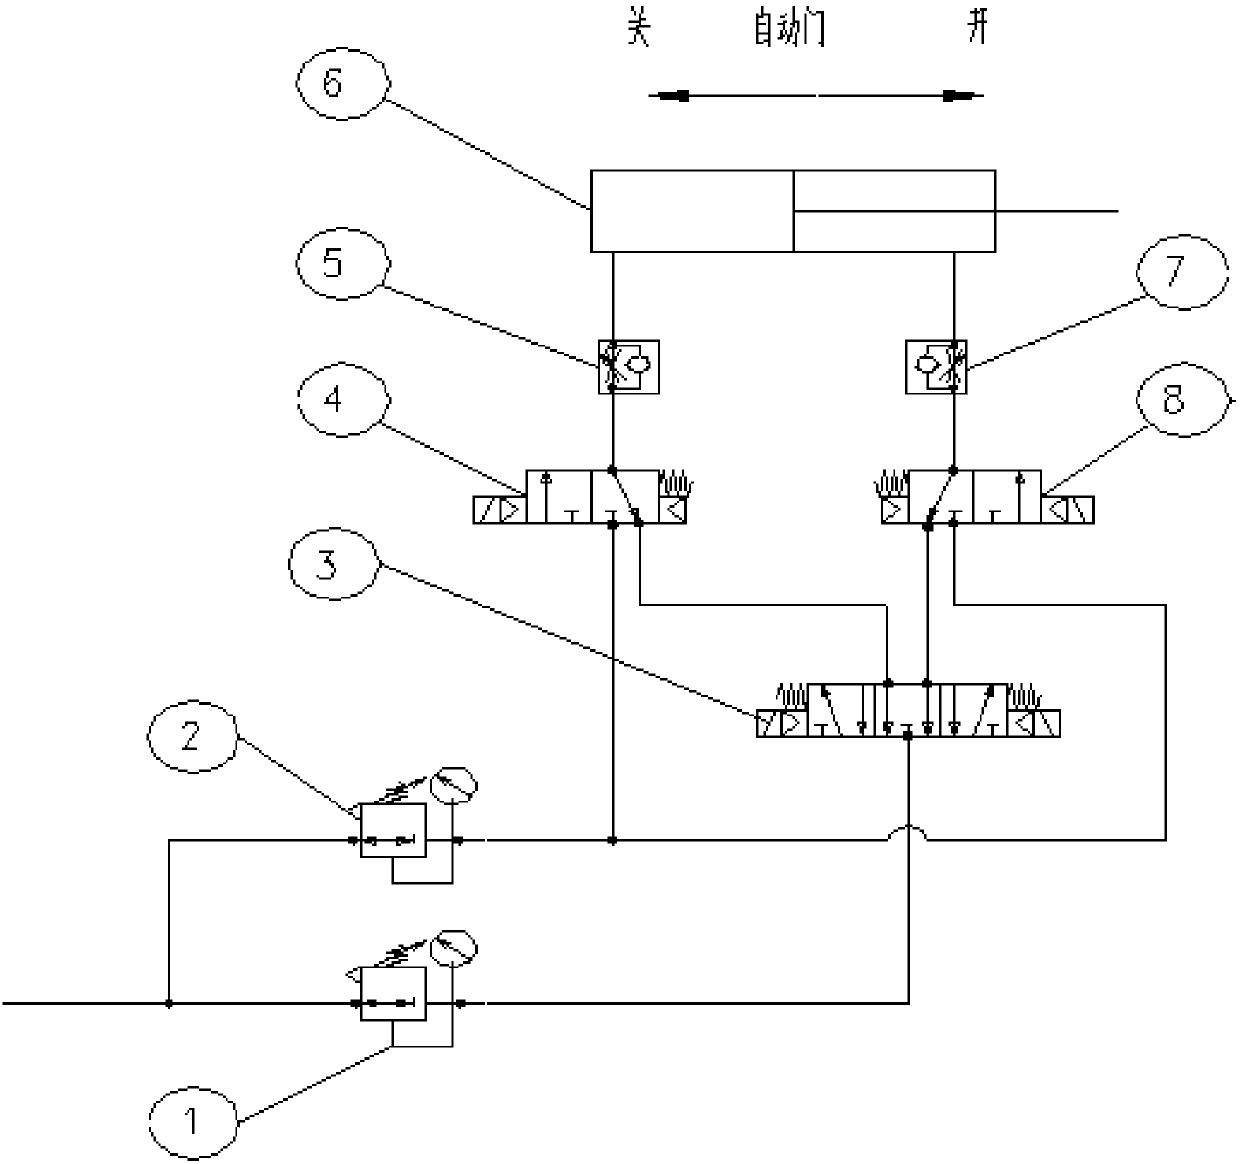 Pneumatic circuit for numerically controlled lathe pneumatic door opening and closing